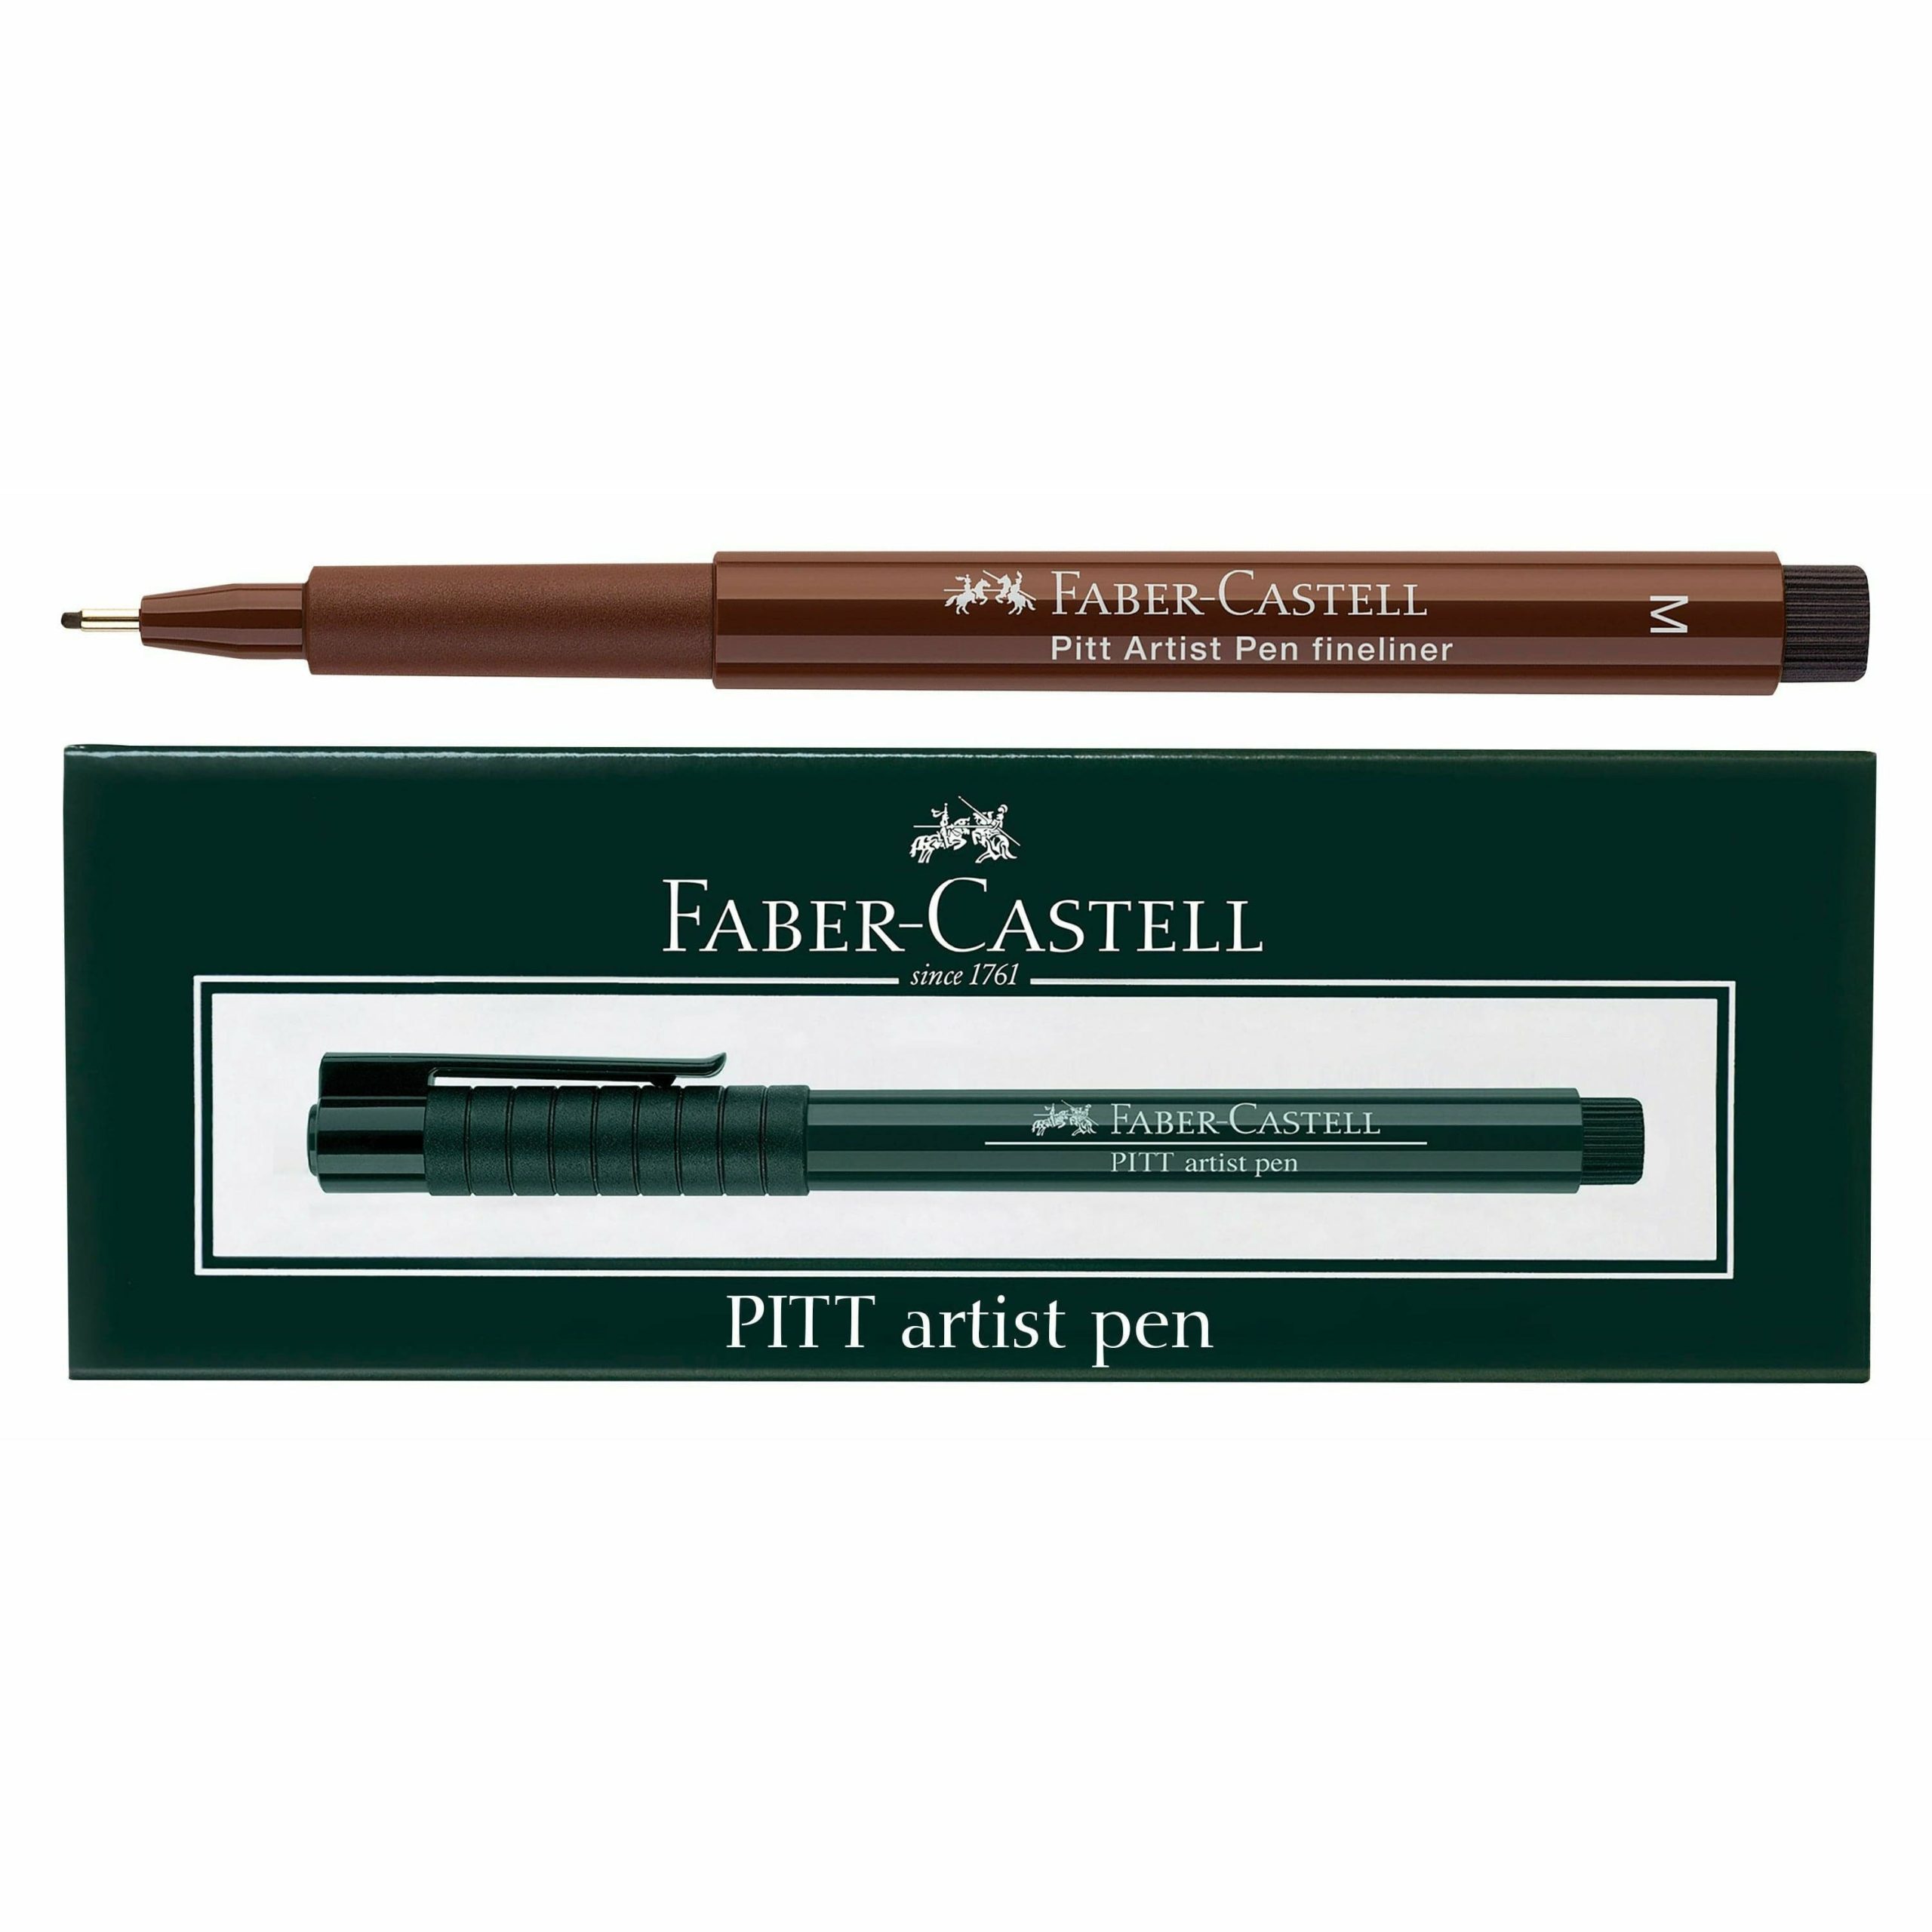 We've got even more fall sales coming select Faber Castell markers and  sets are currently 20% off. Come try some new PITT pen…